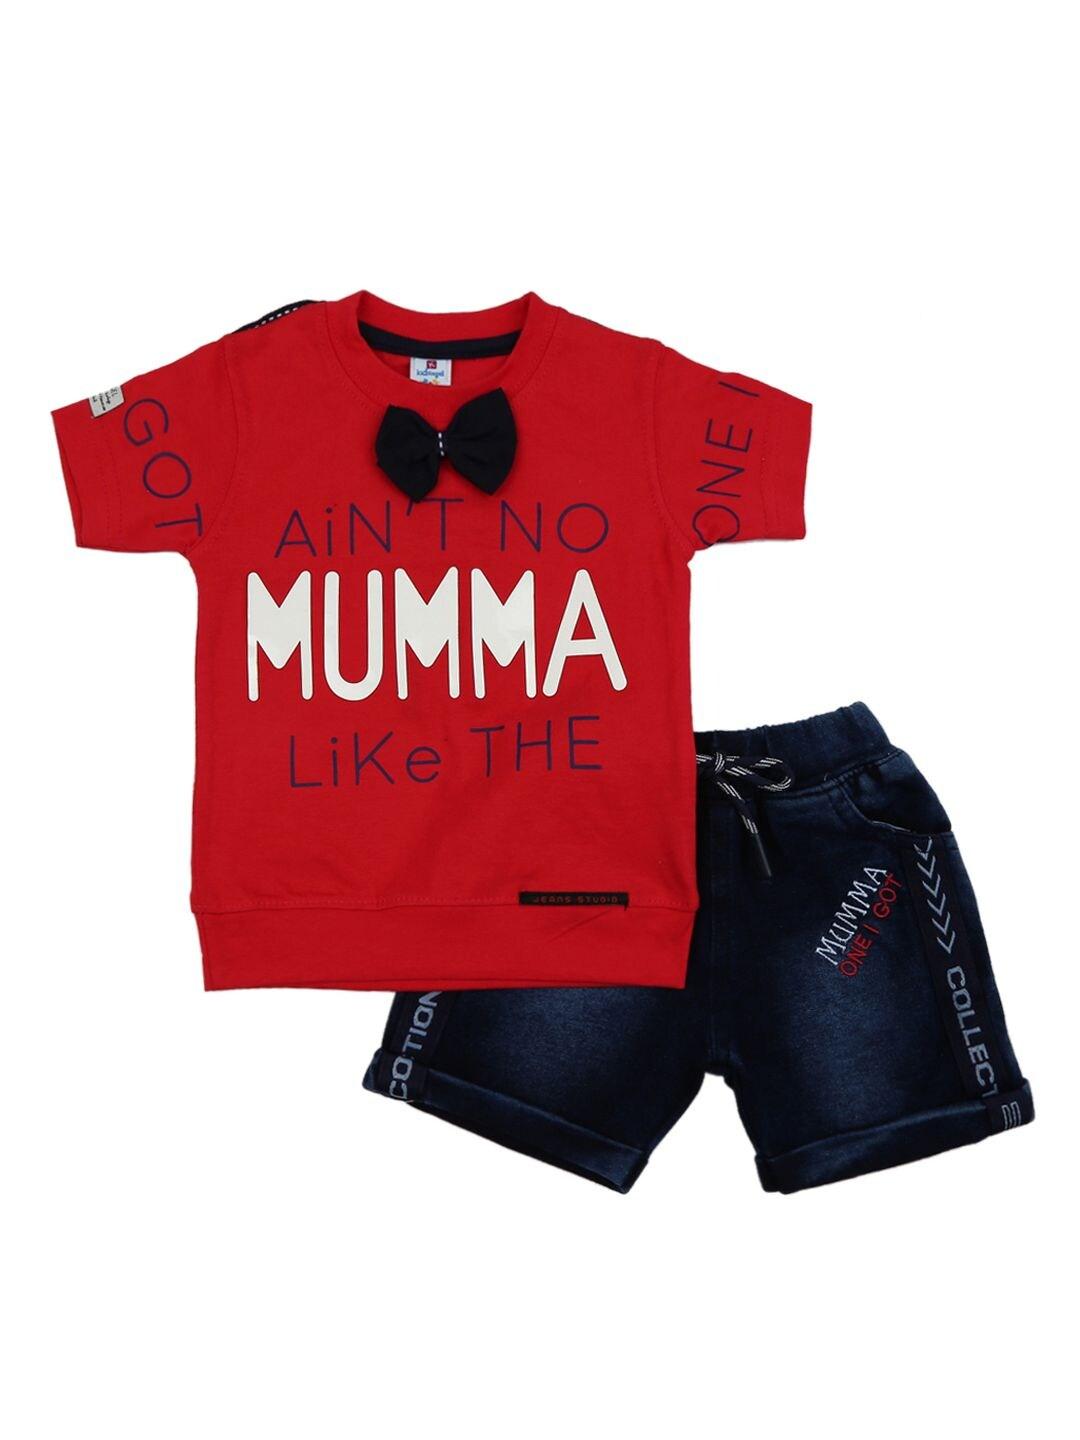 v-mart unisex kids red printed t-shirt and shirt with shorts